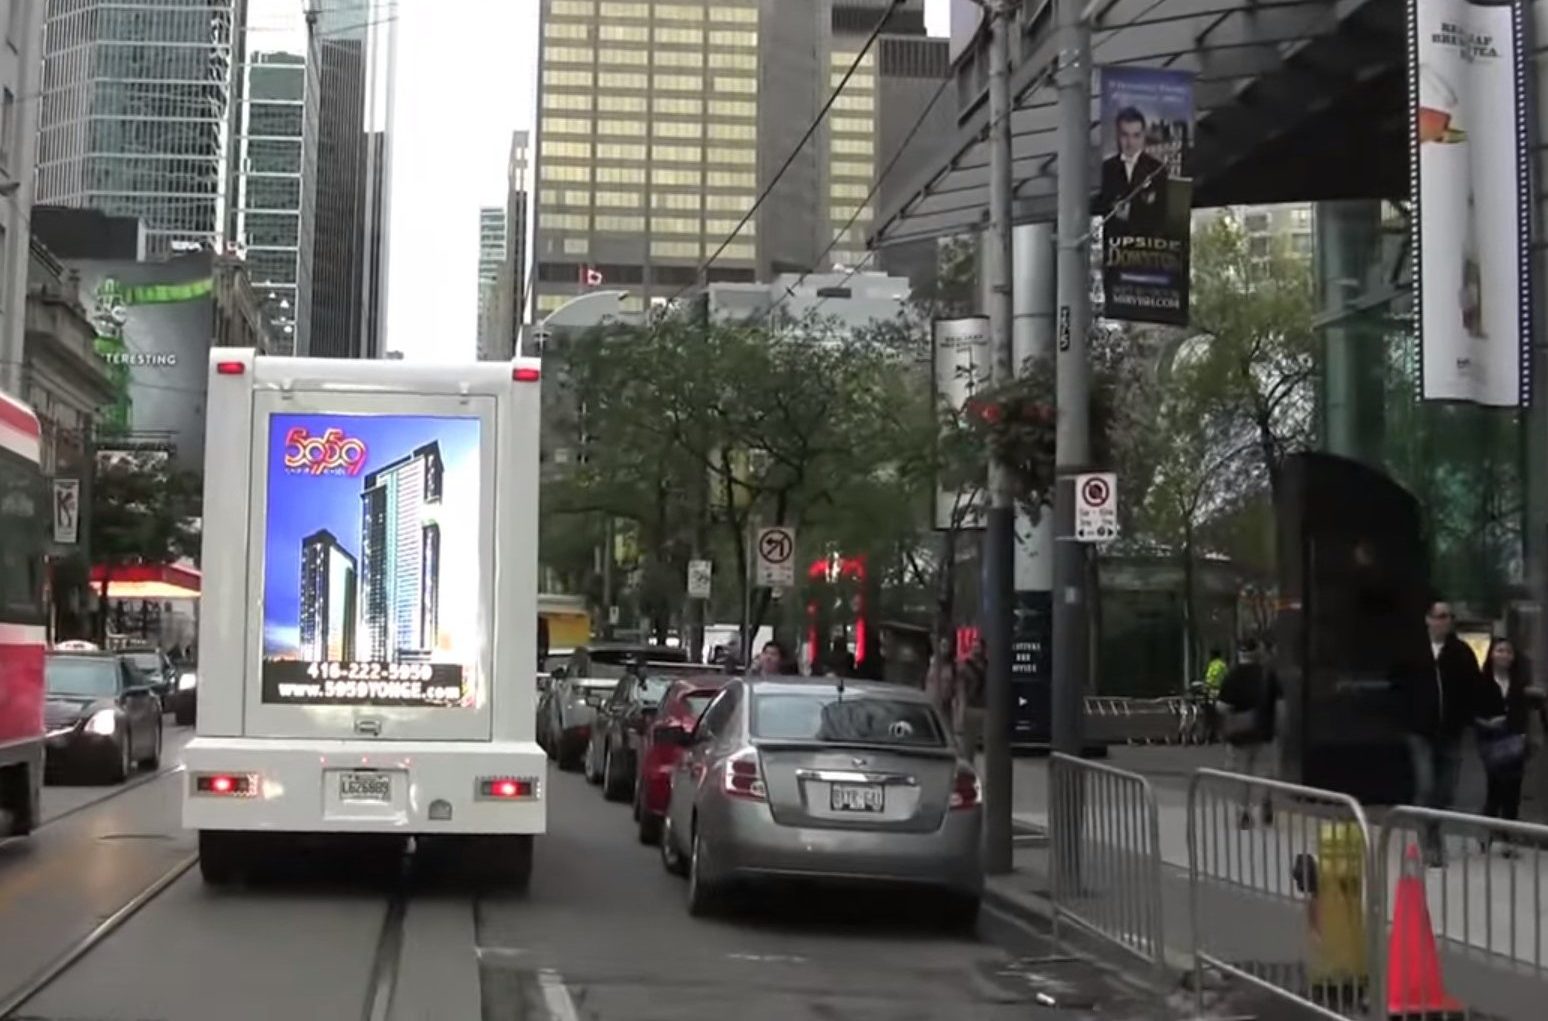 Truck ads digital and video options